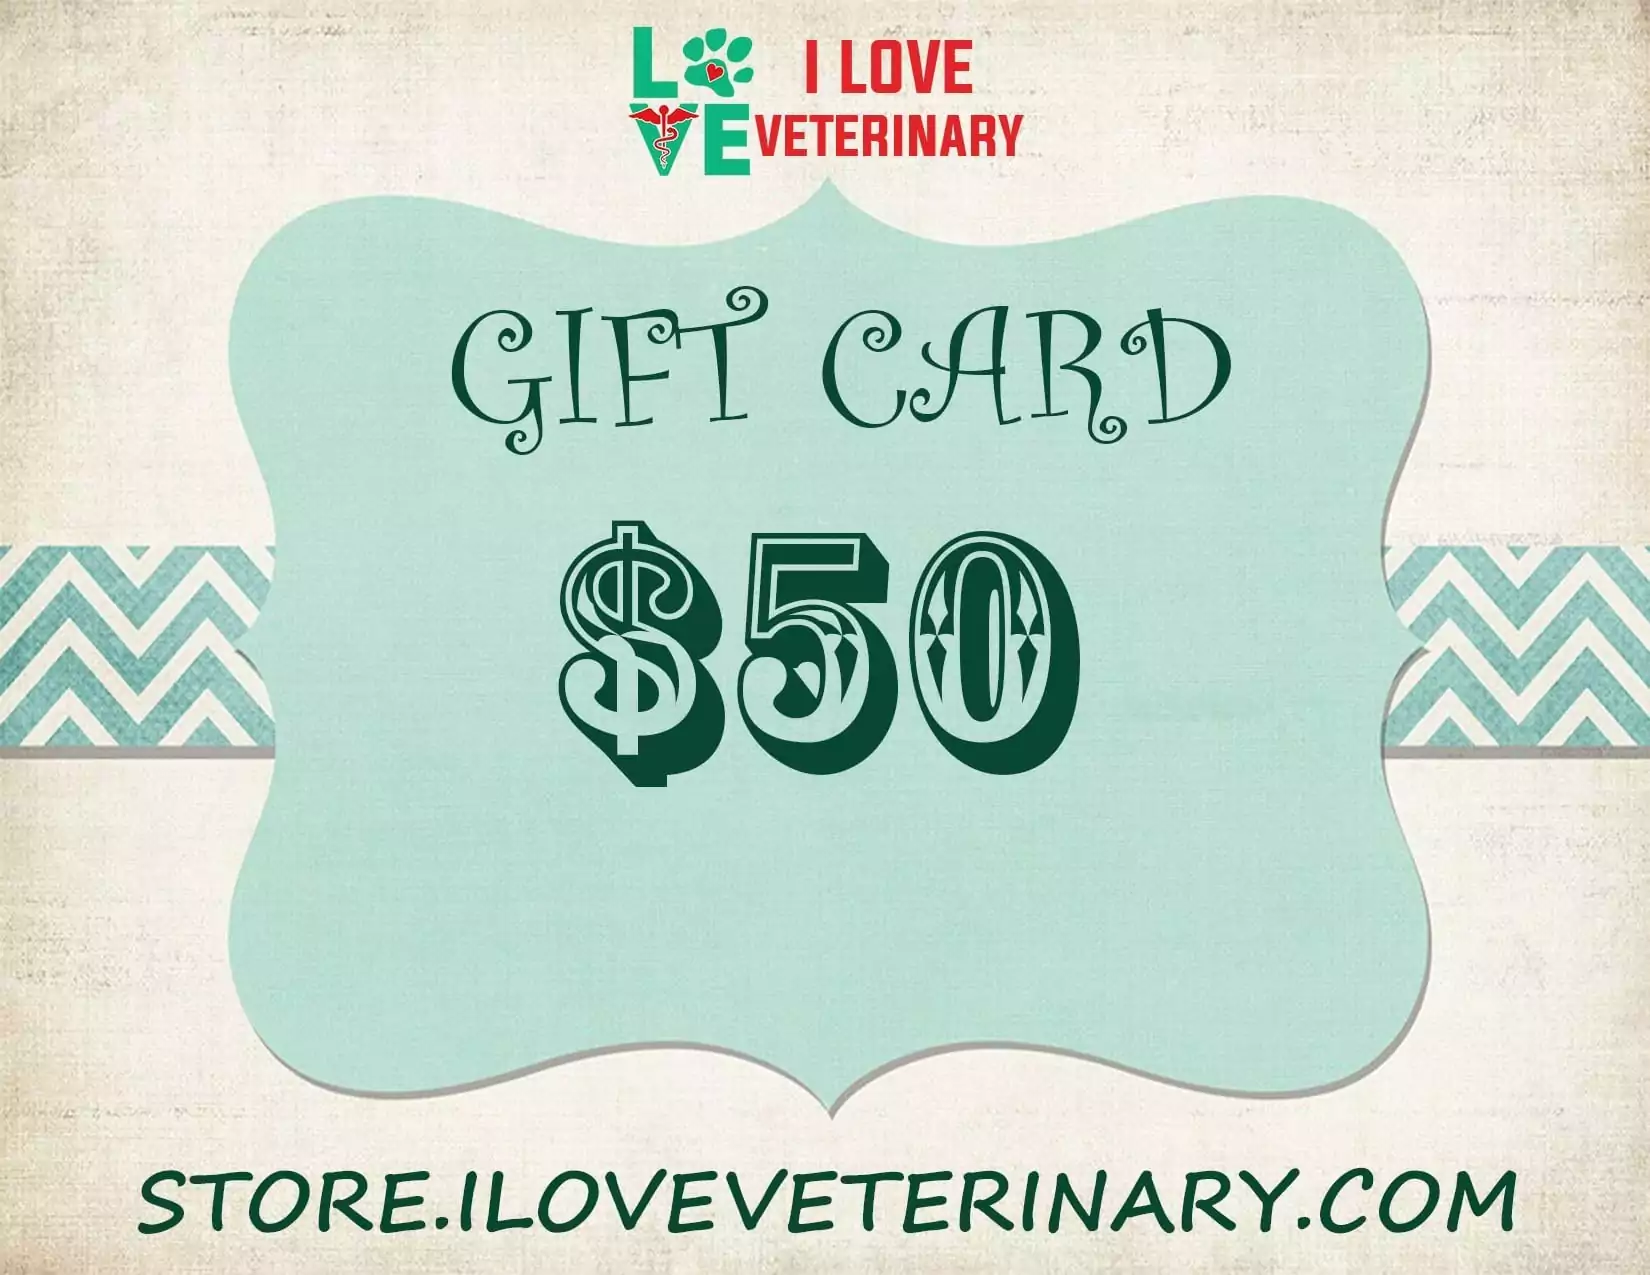 gift card gift card i love veterinary veterinary I Love Veterinary - Blog for Veterinarians, Vet Techs, Students